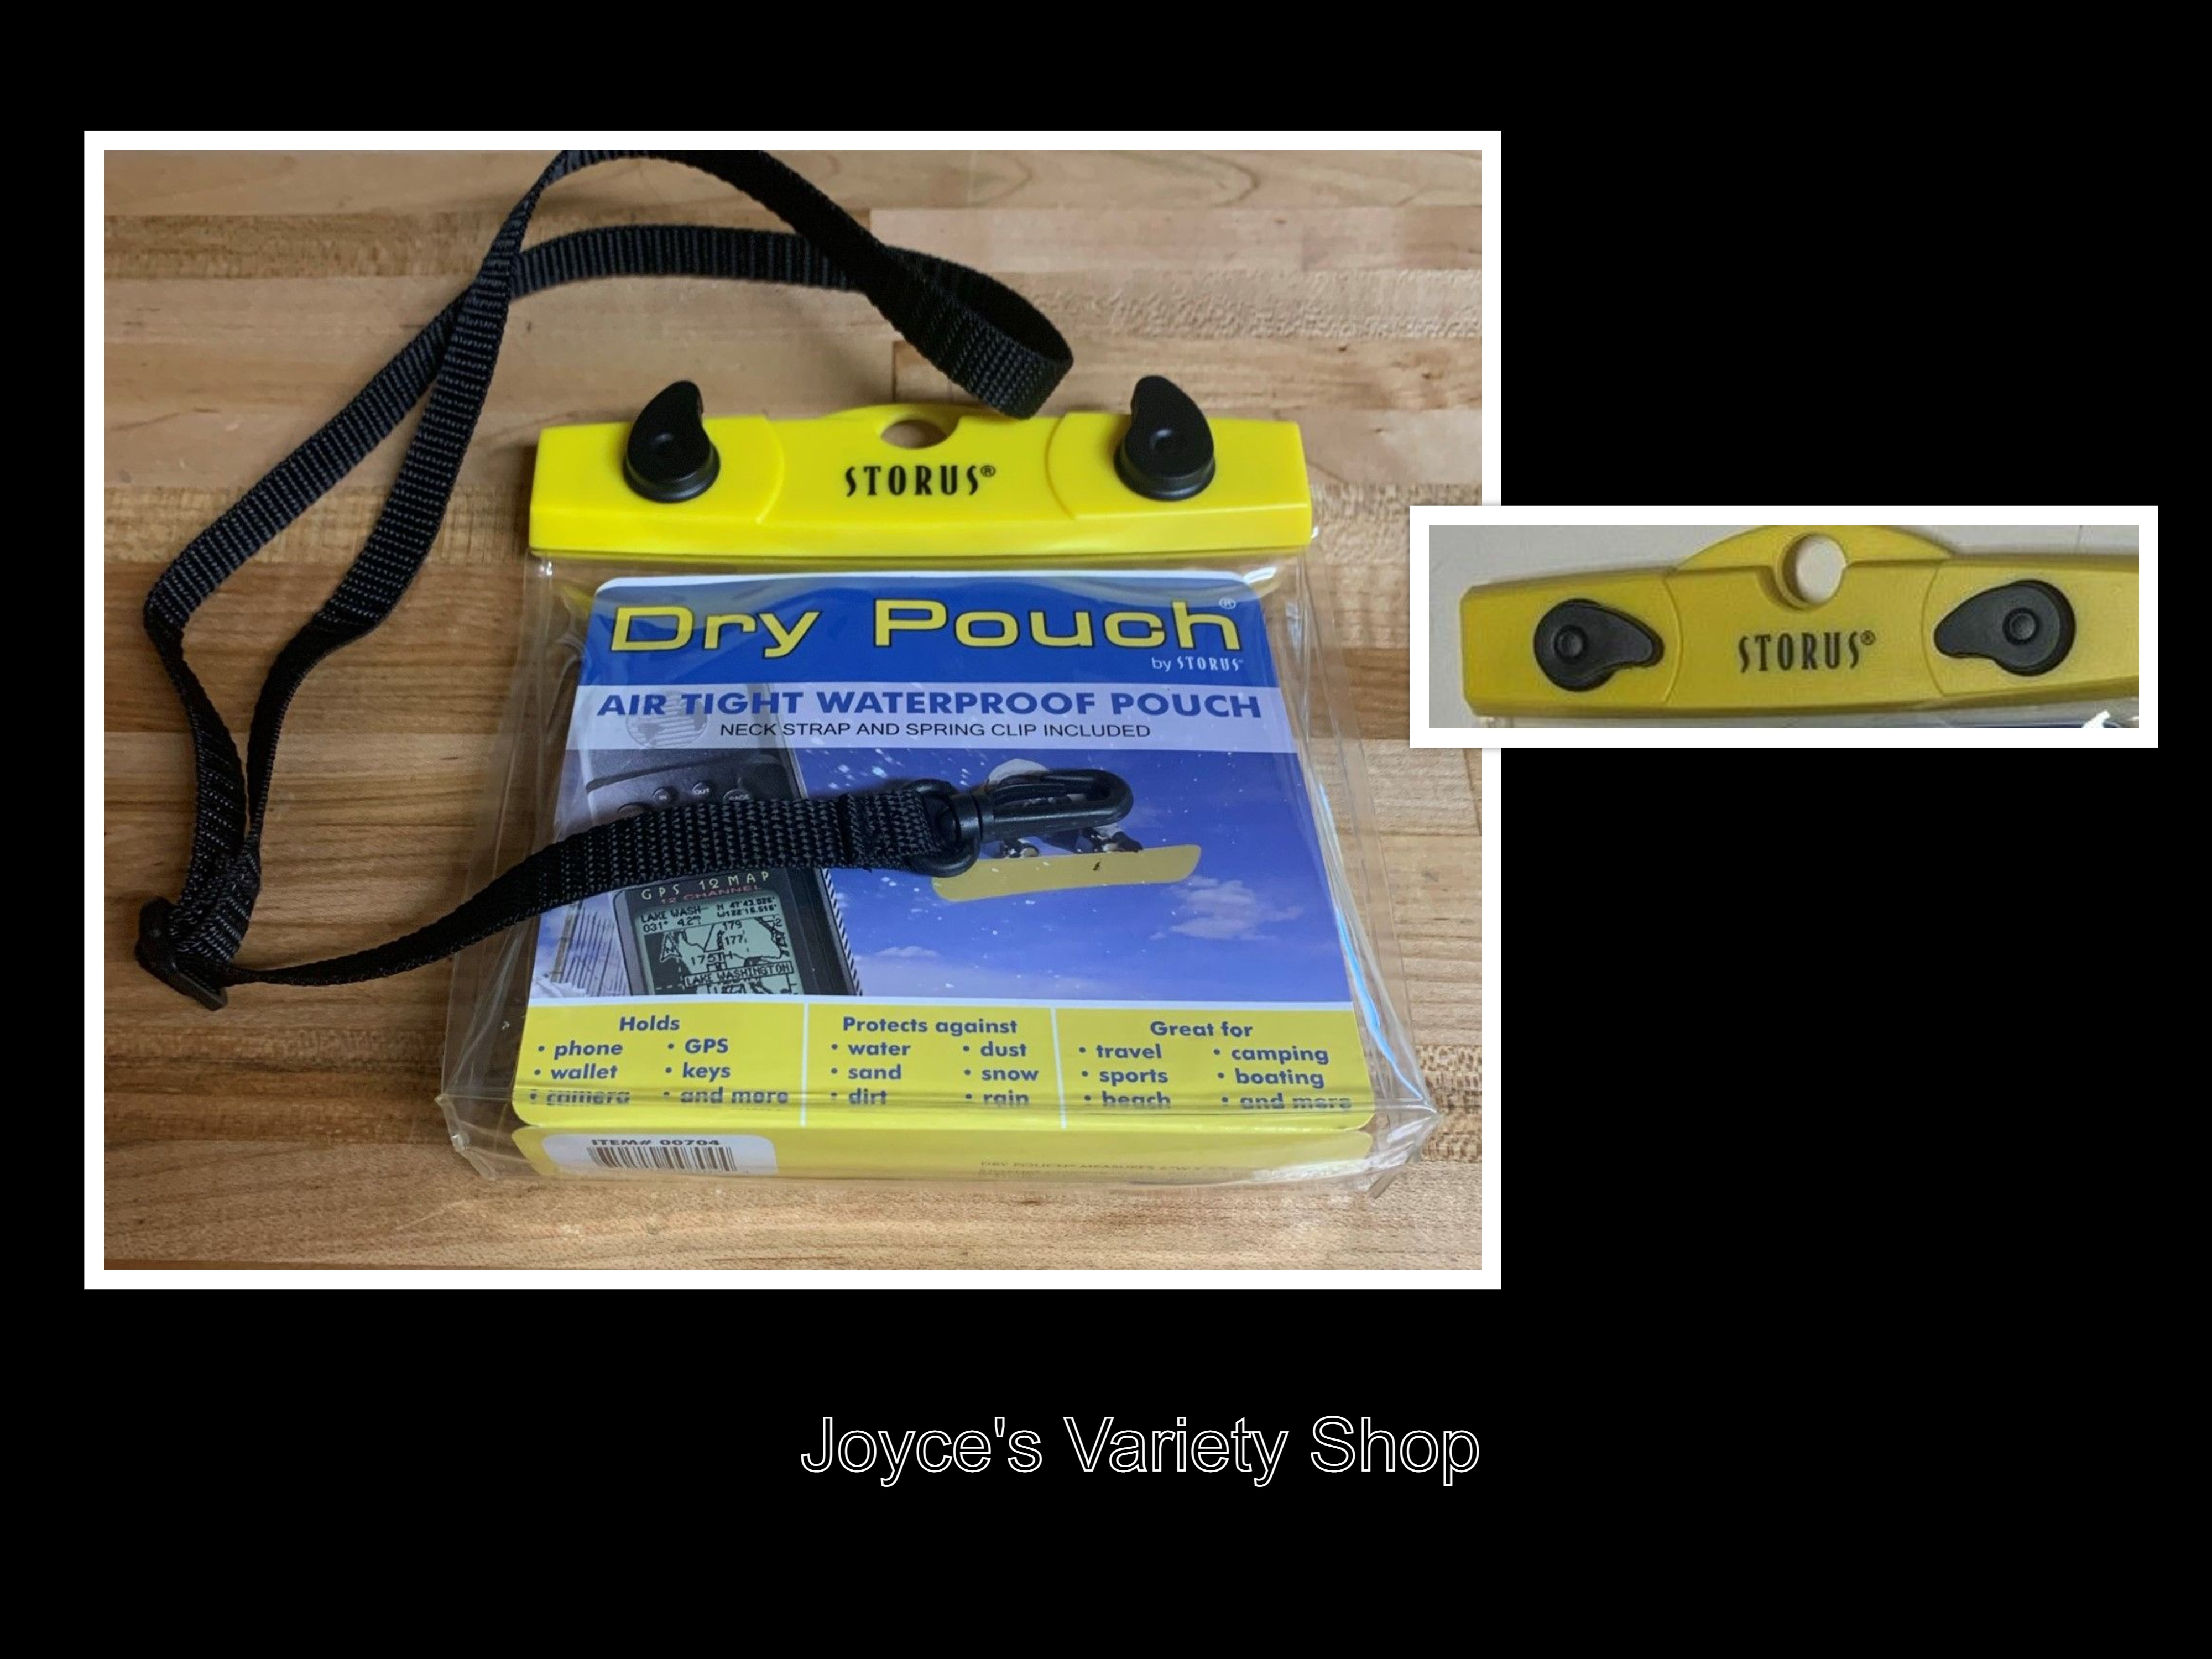 Storus Dry Pouch Air Tight Waterproof Neck Strap & Clip Included 6" x 5"